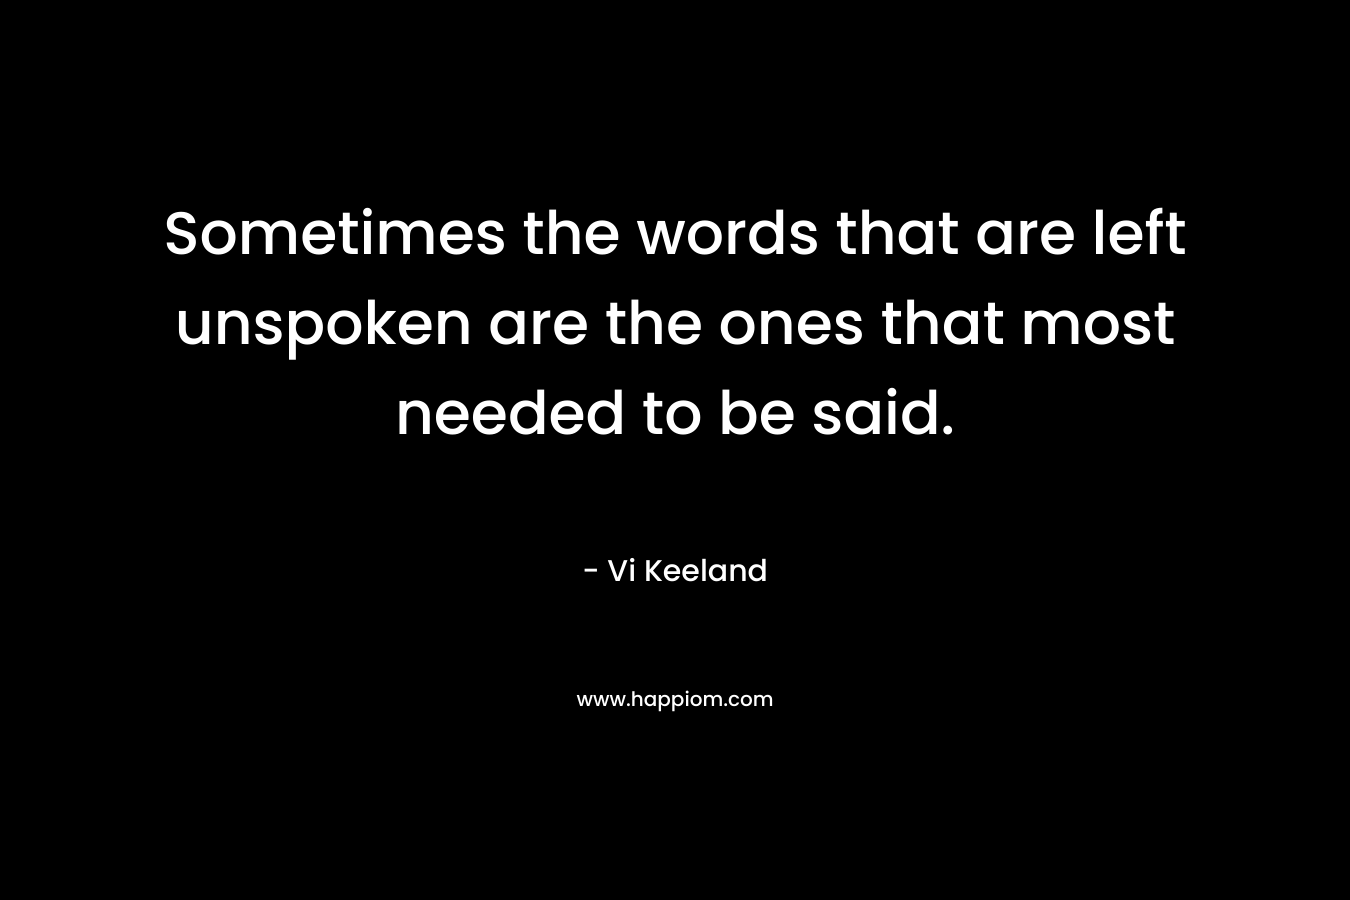 Sometimes the words that are left unspoken are the ones that most needed to be said. – Vi Keeland